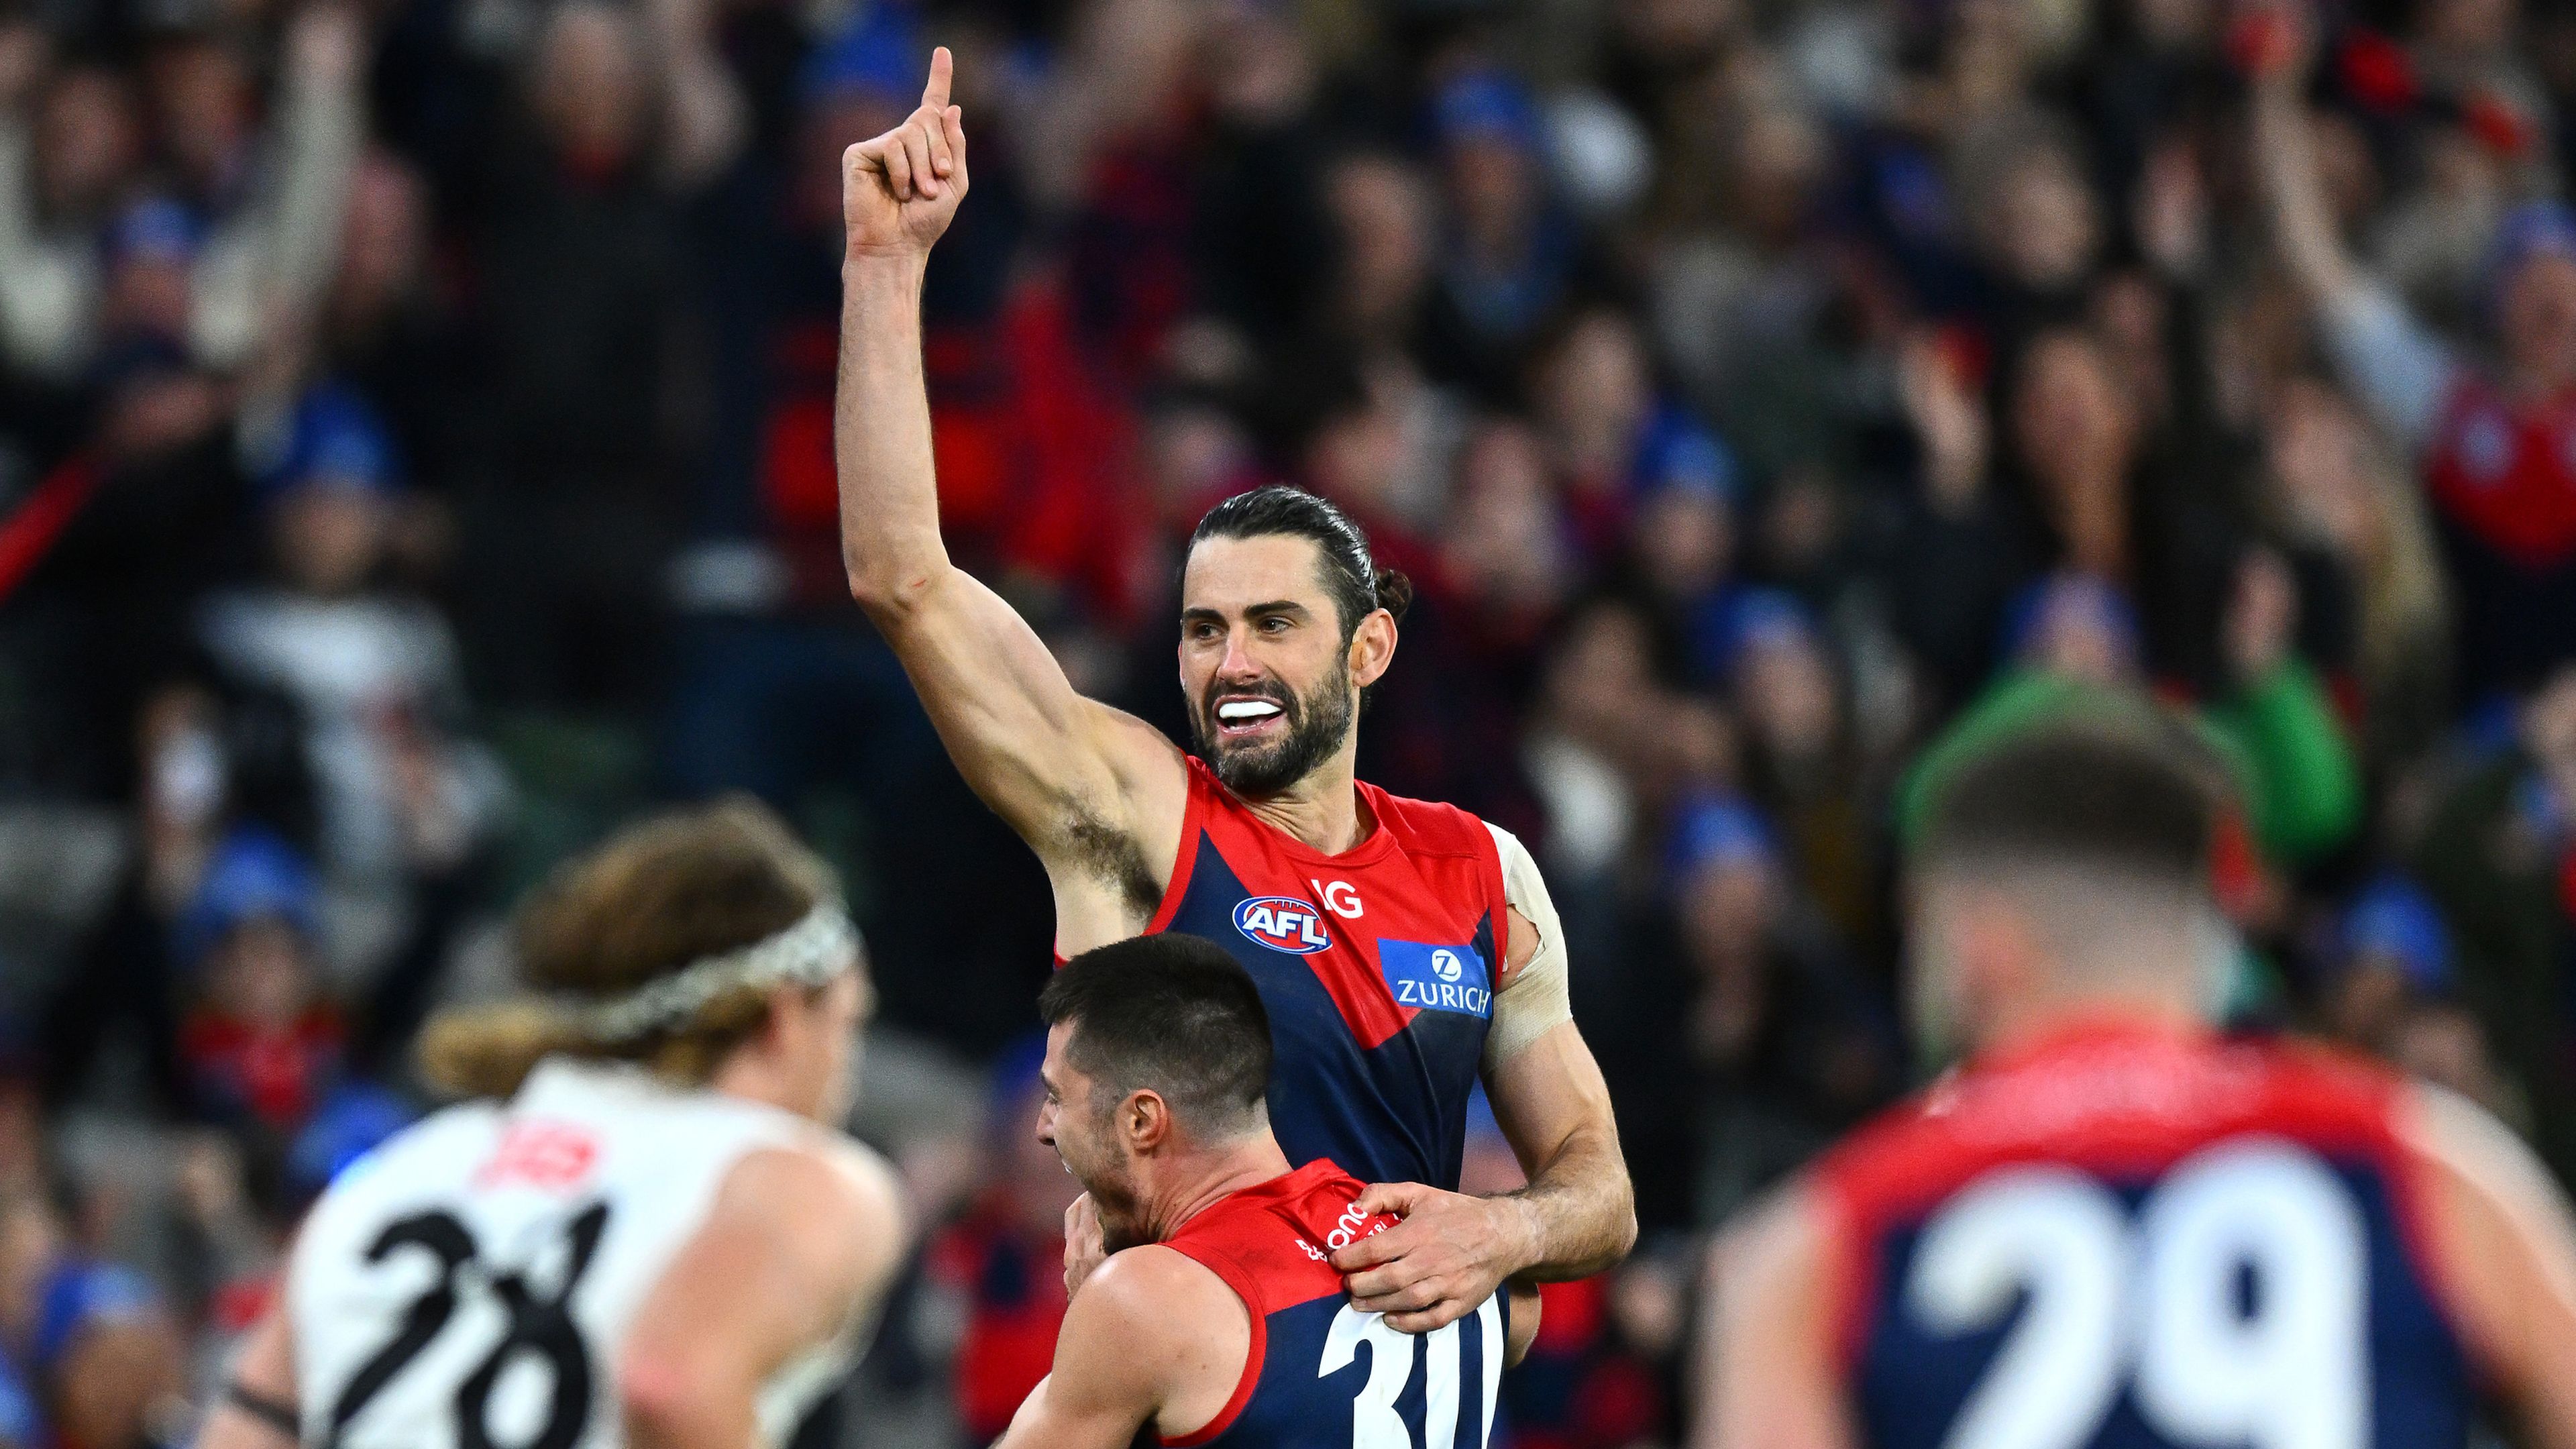 'We all really care': Why Magpies coach showed team a Brodie Grundy photo pre-game